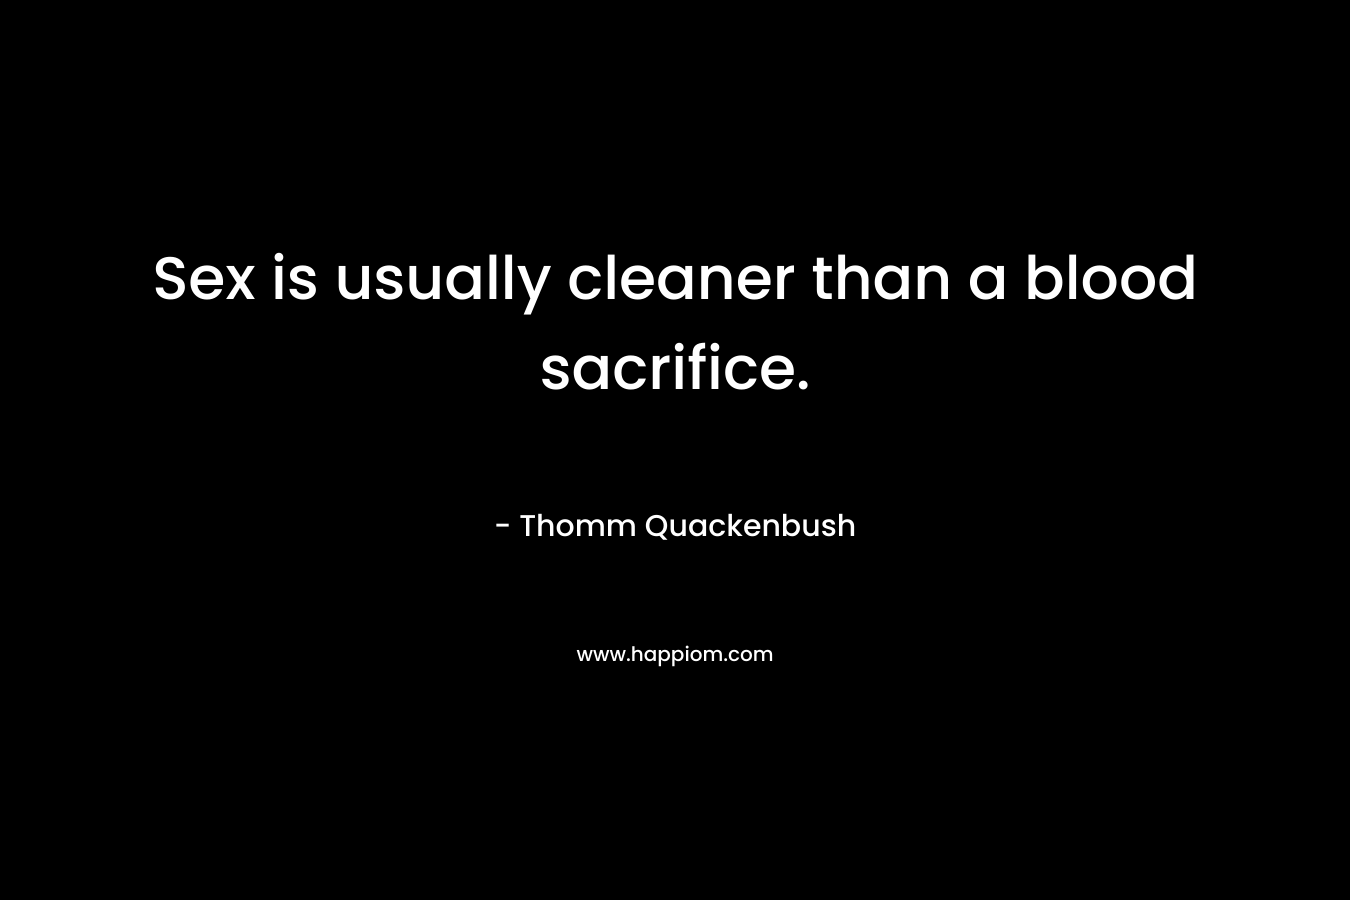 Sex is usually cleaner than a blood sacrifice.